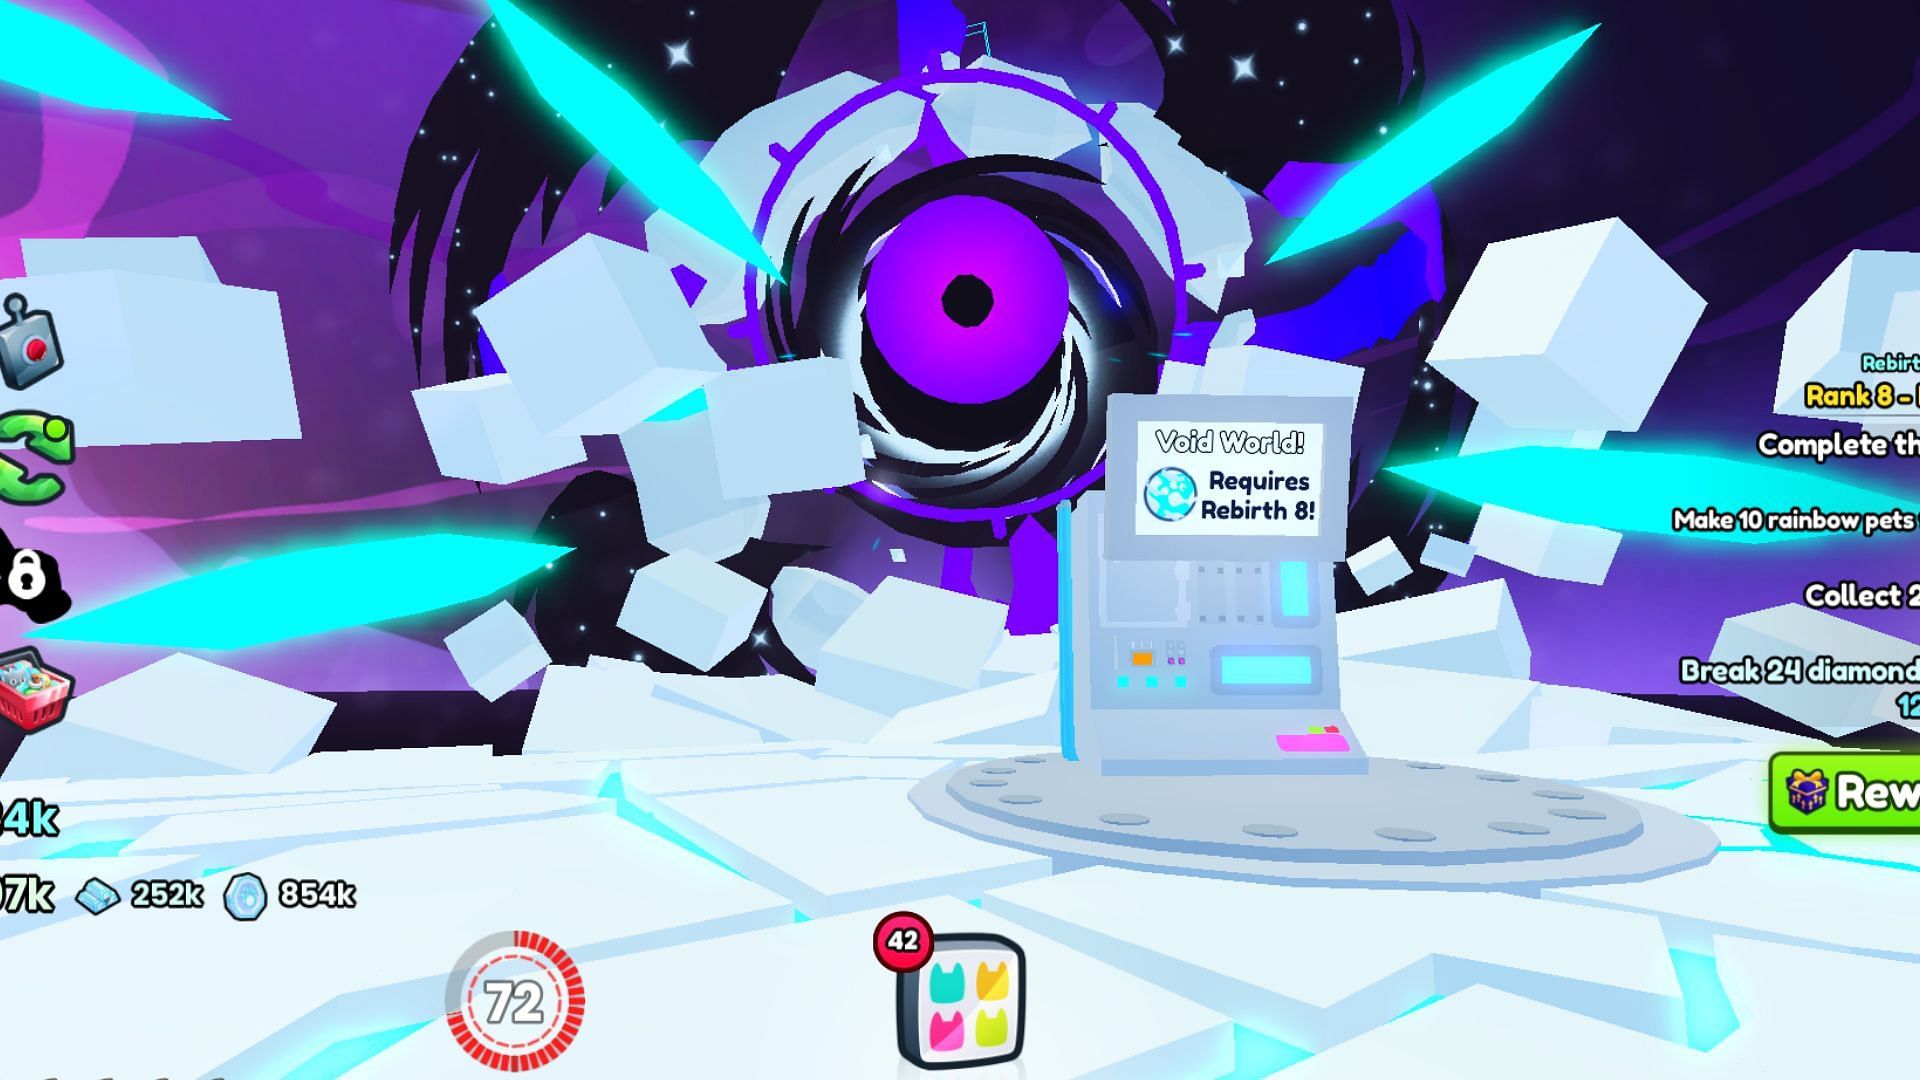 Use the machine to teleport to the Void World (Image via Roblox)